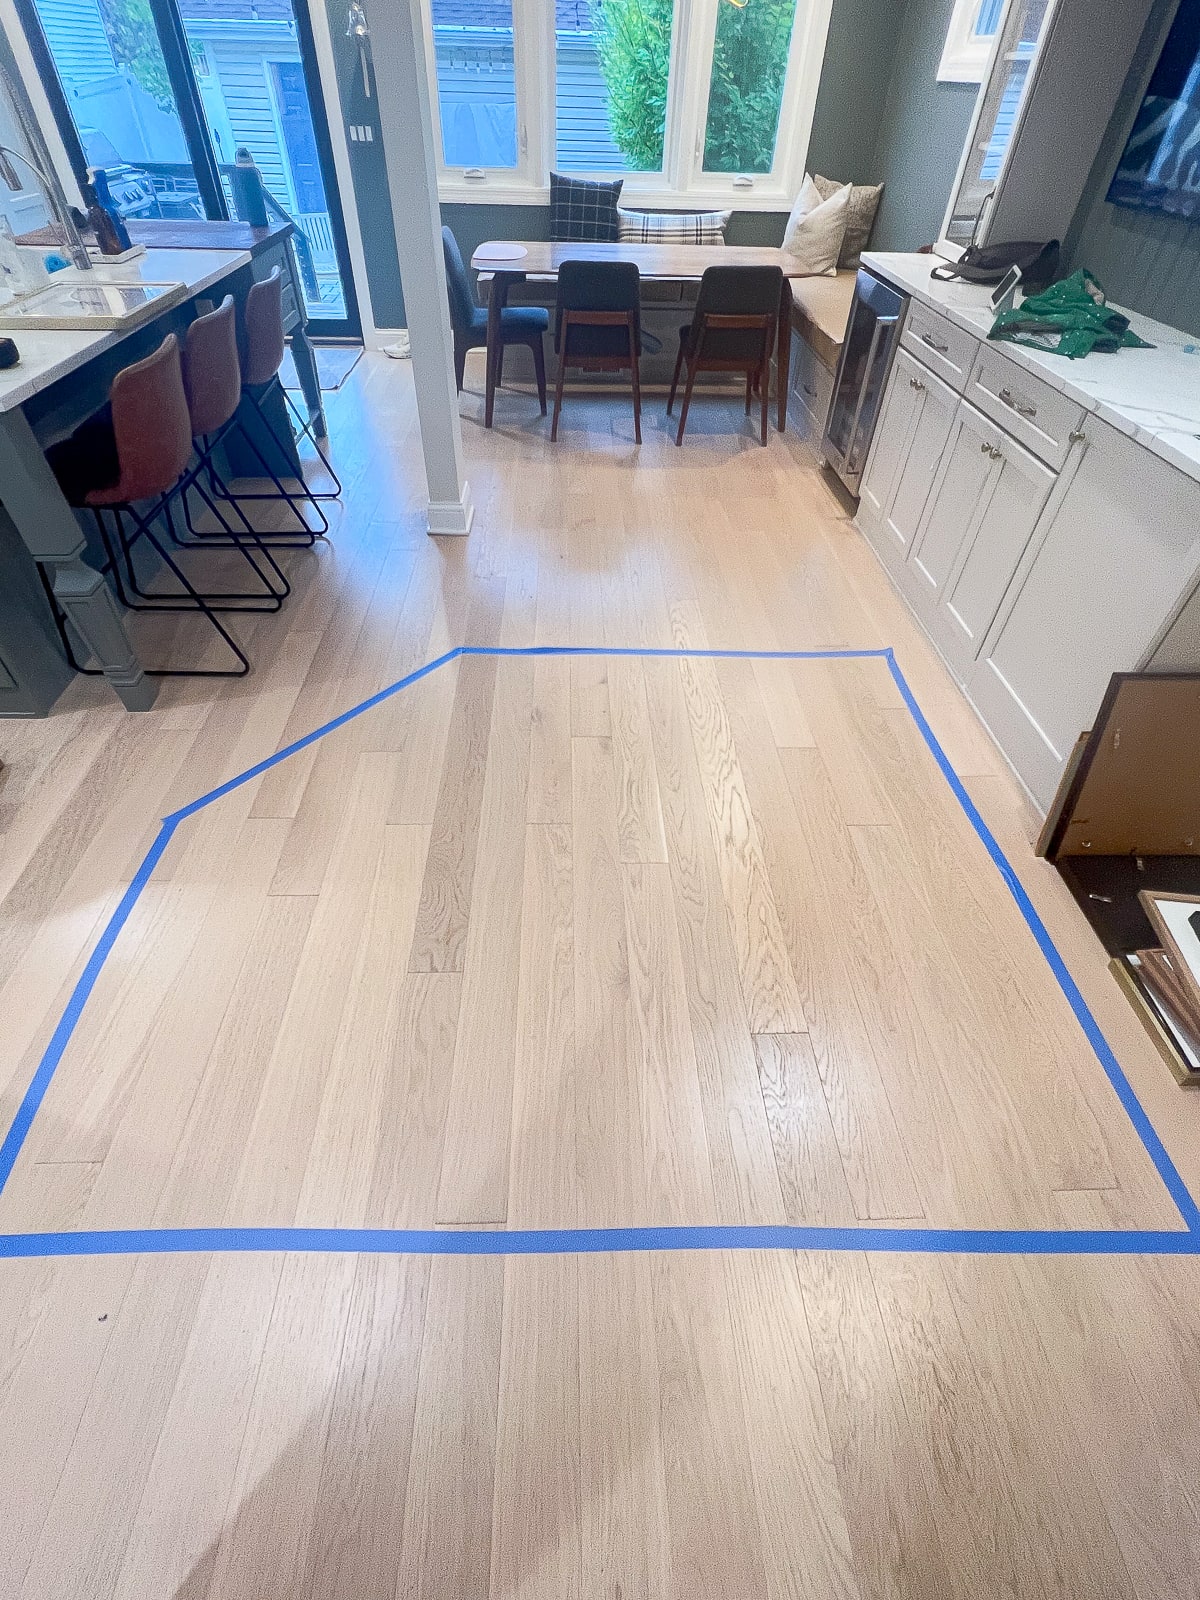 Use painter's tape on the floor to figure out your gallery wall layout